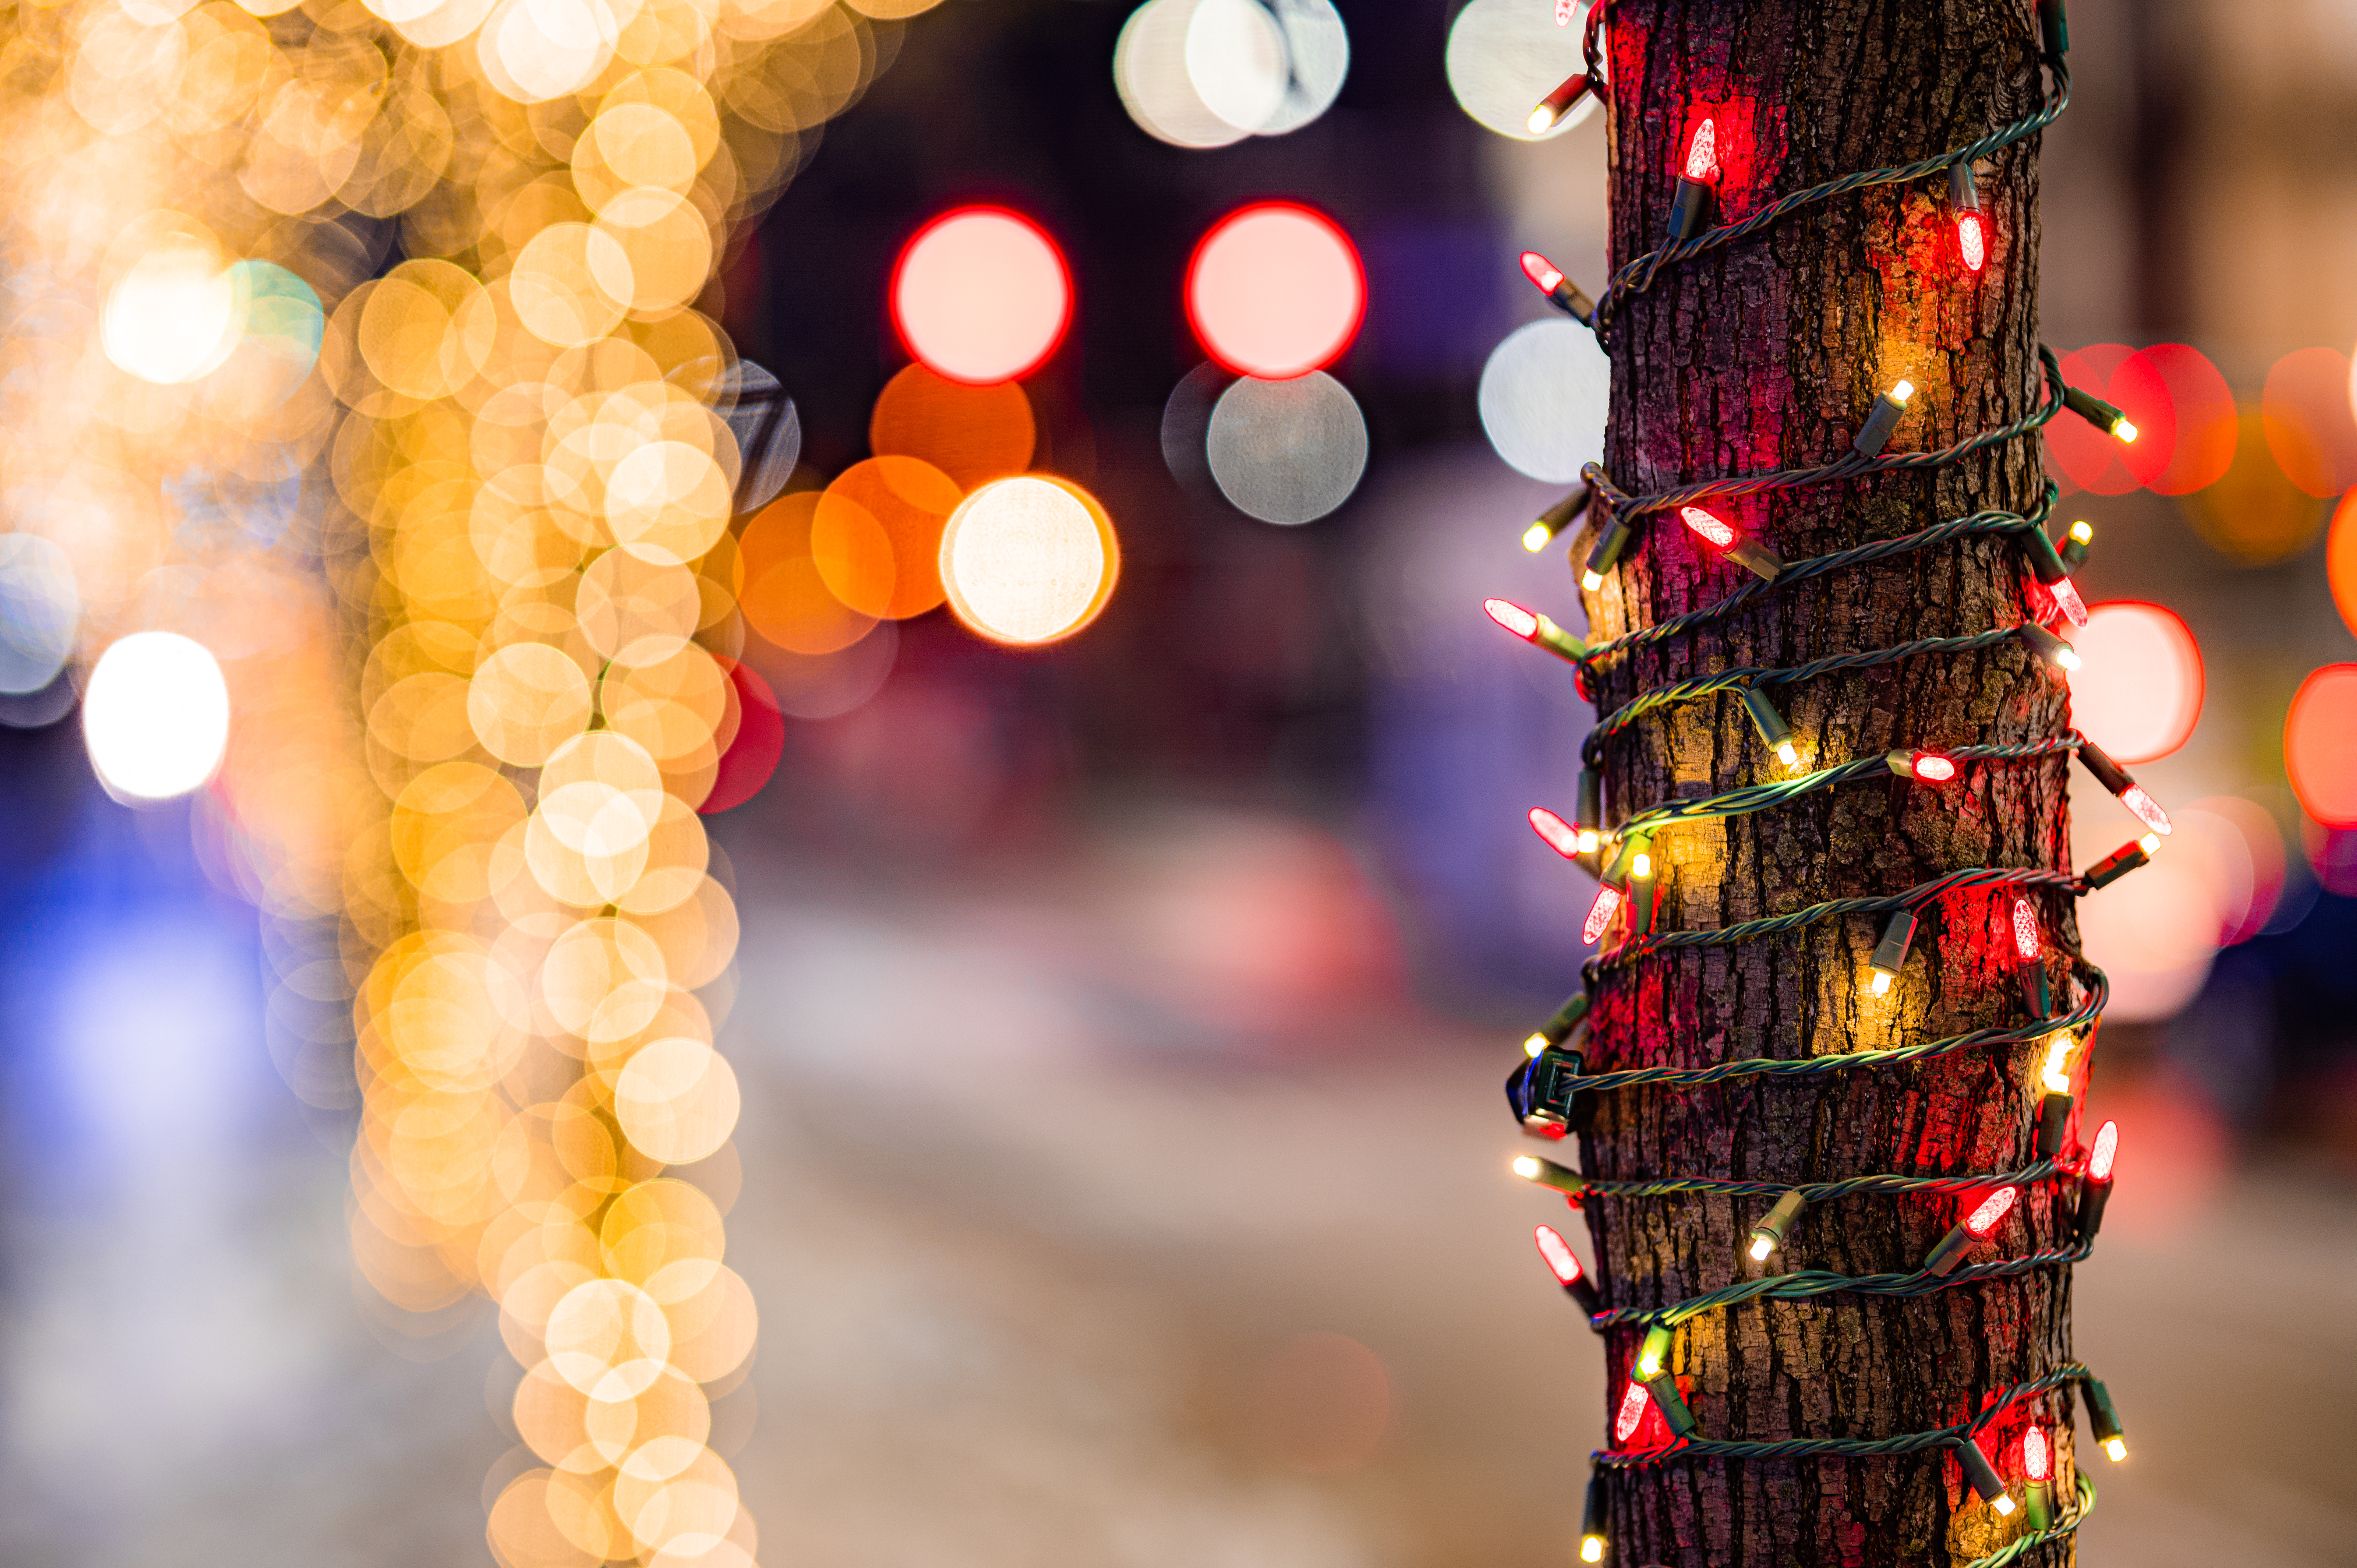 lights, holidays, glare, wood, multicolored, motley, tree, garland lock screen backgrounds